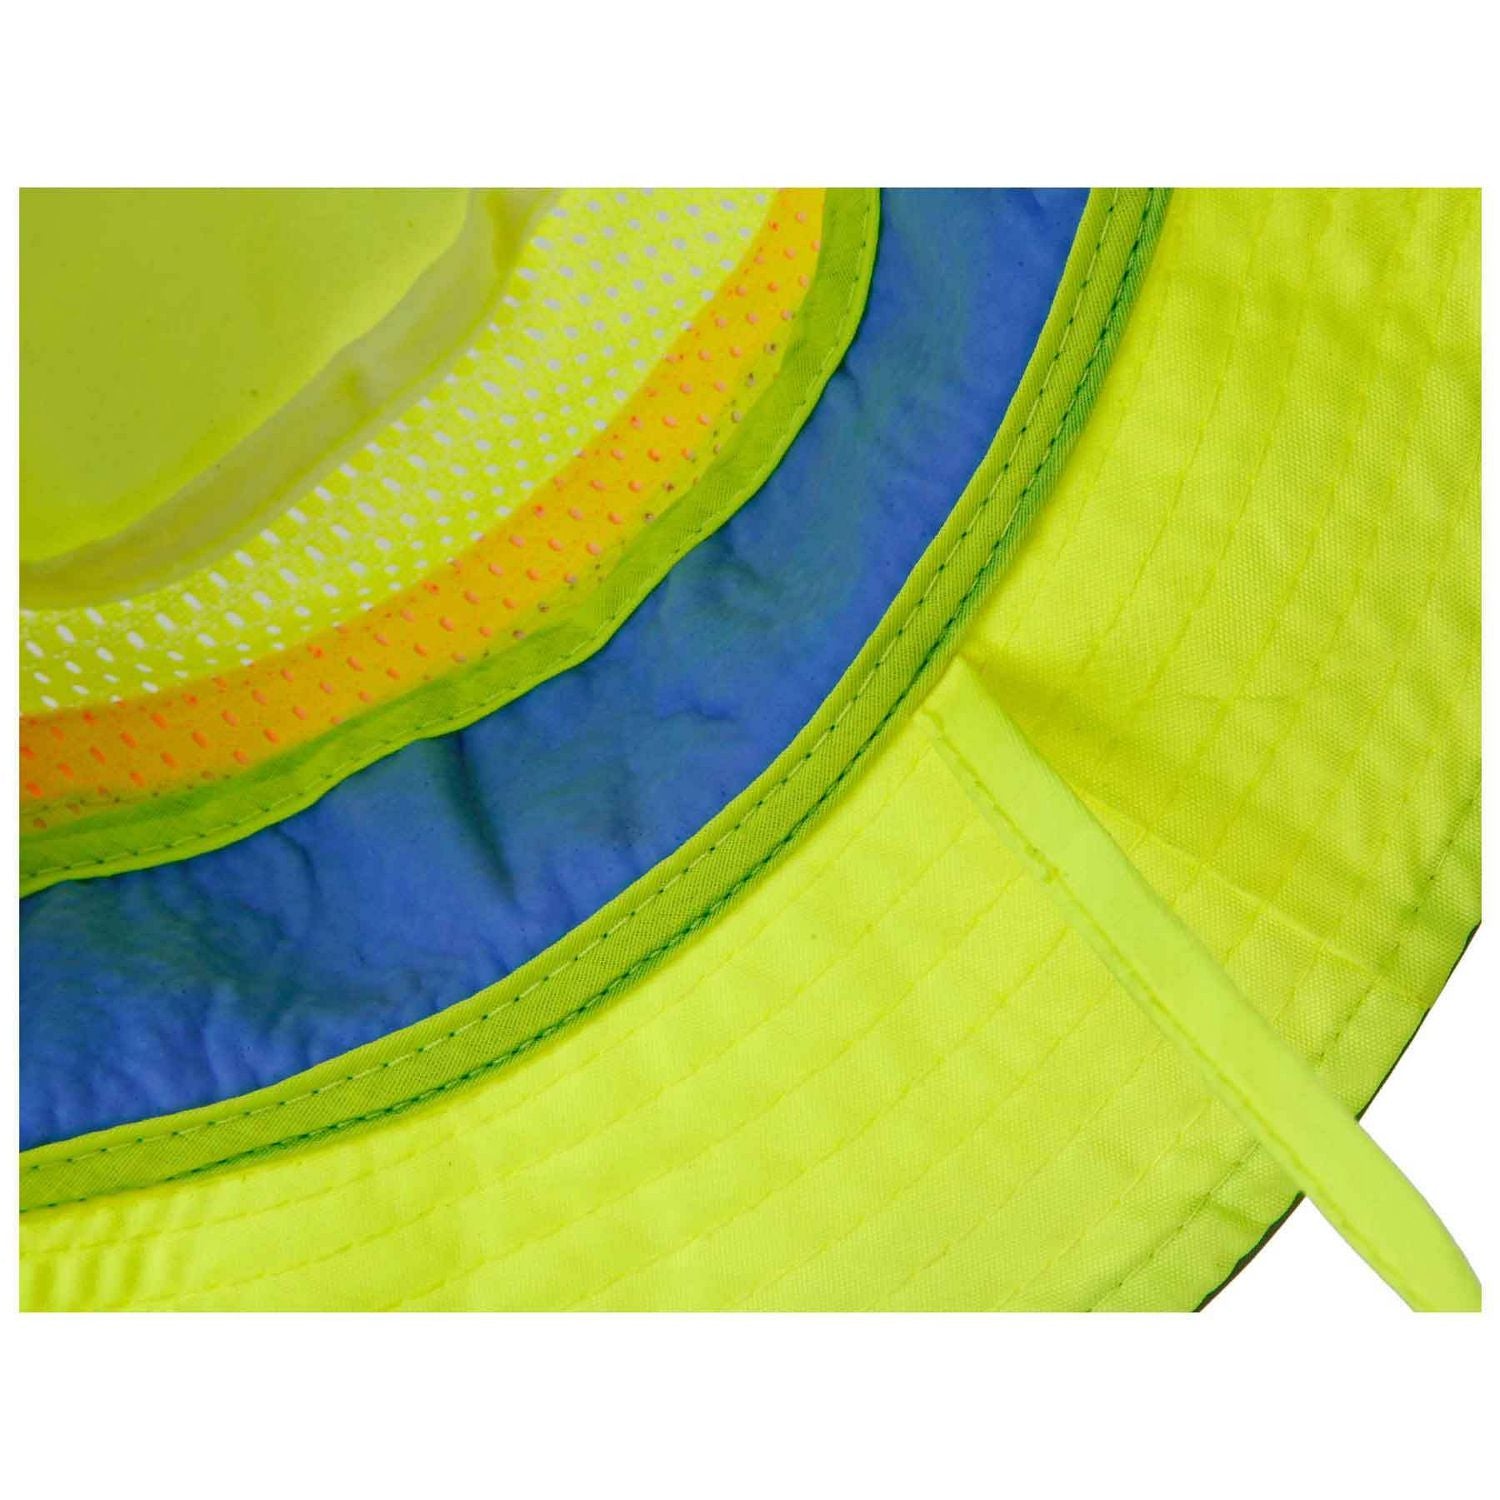 chill-its-8935ct-hi-vis-pva-ranger-sun-hat-polyester-pva-2x-large-3x-large-lime-ships-in-1-3-business-days_ego12600 - 8